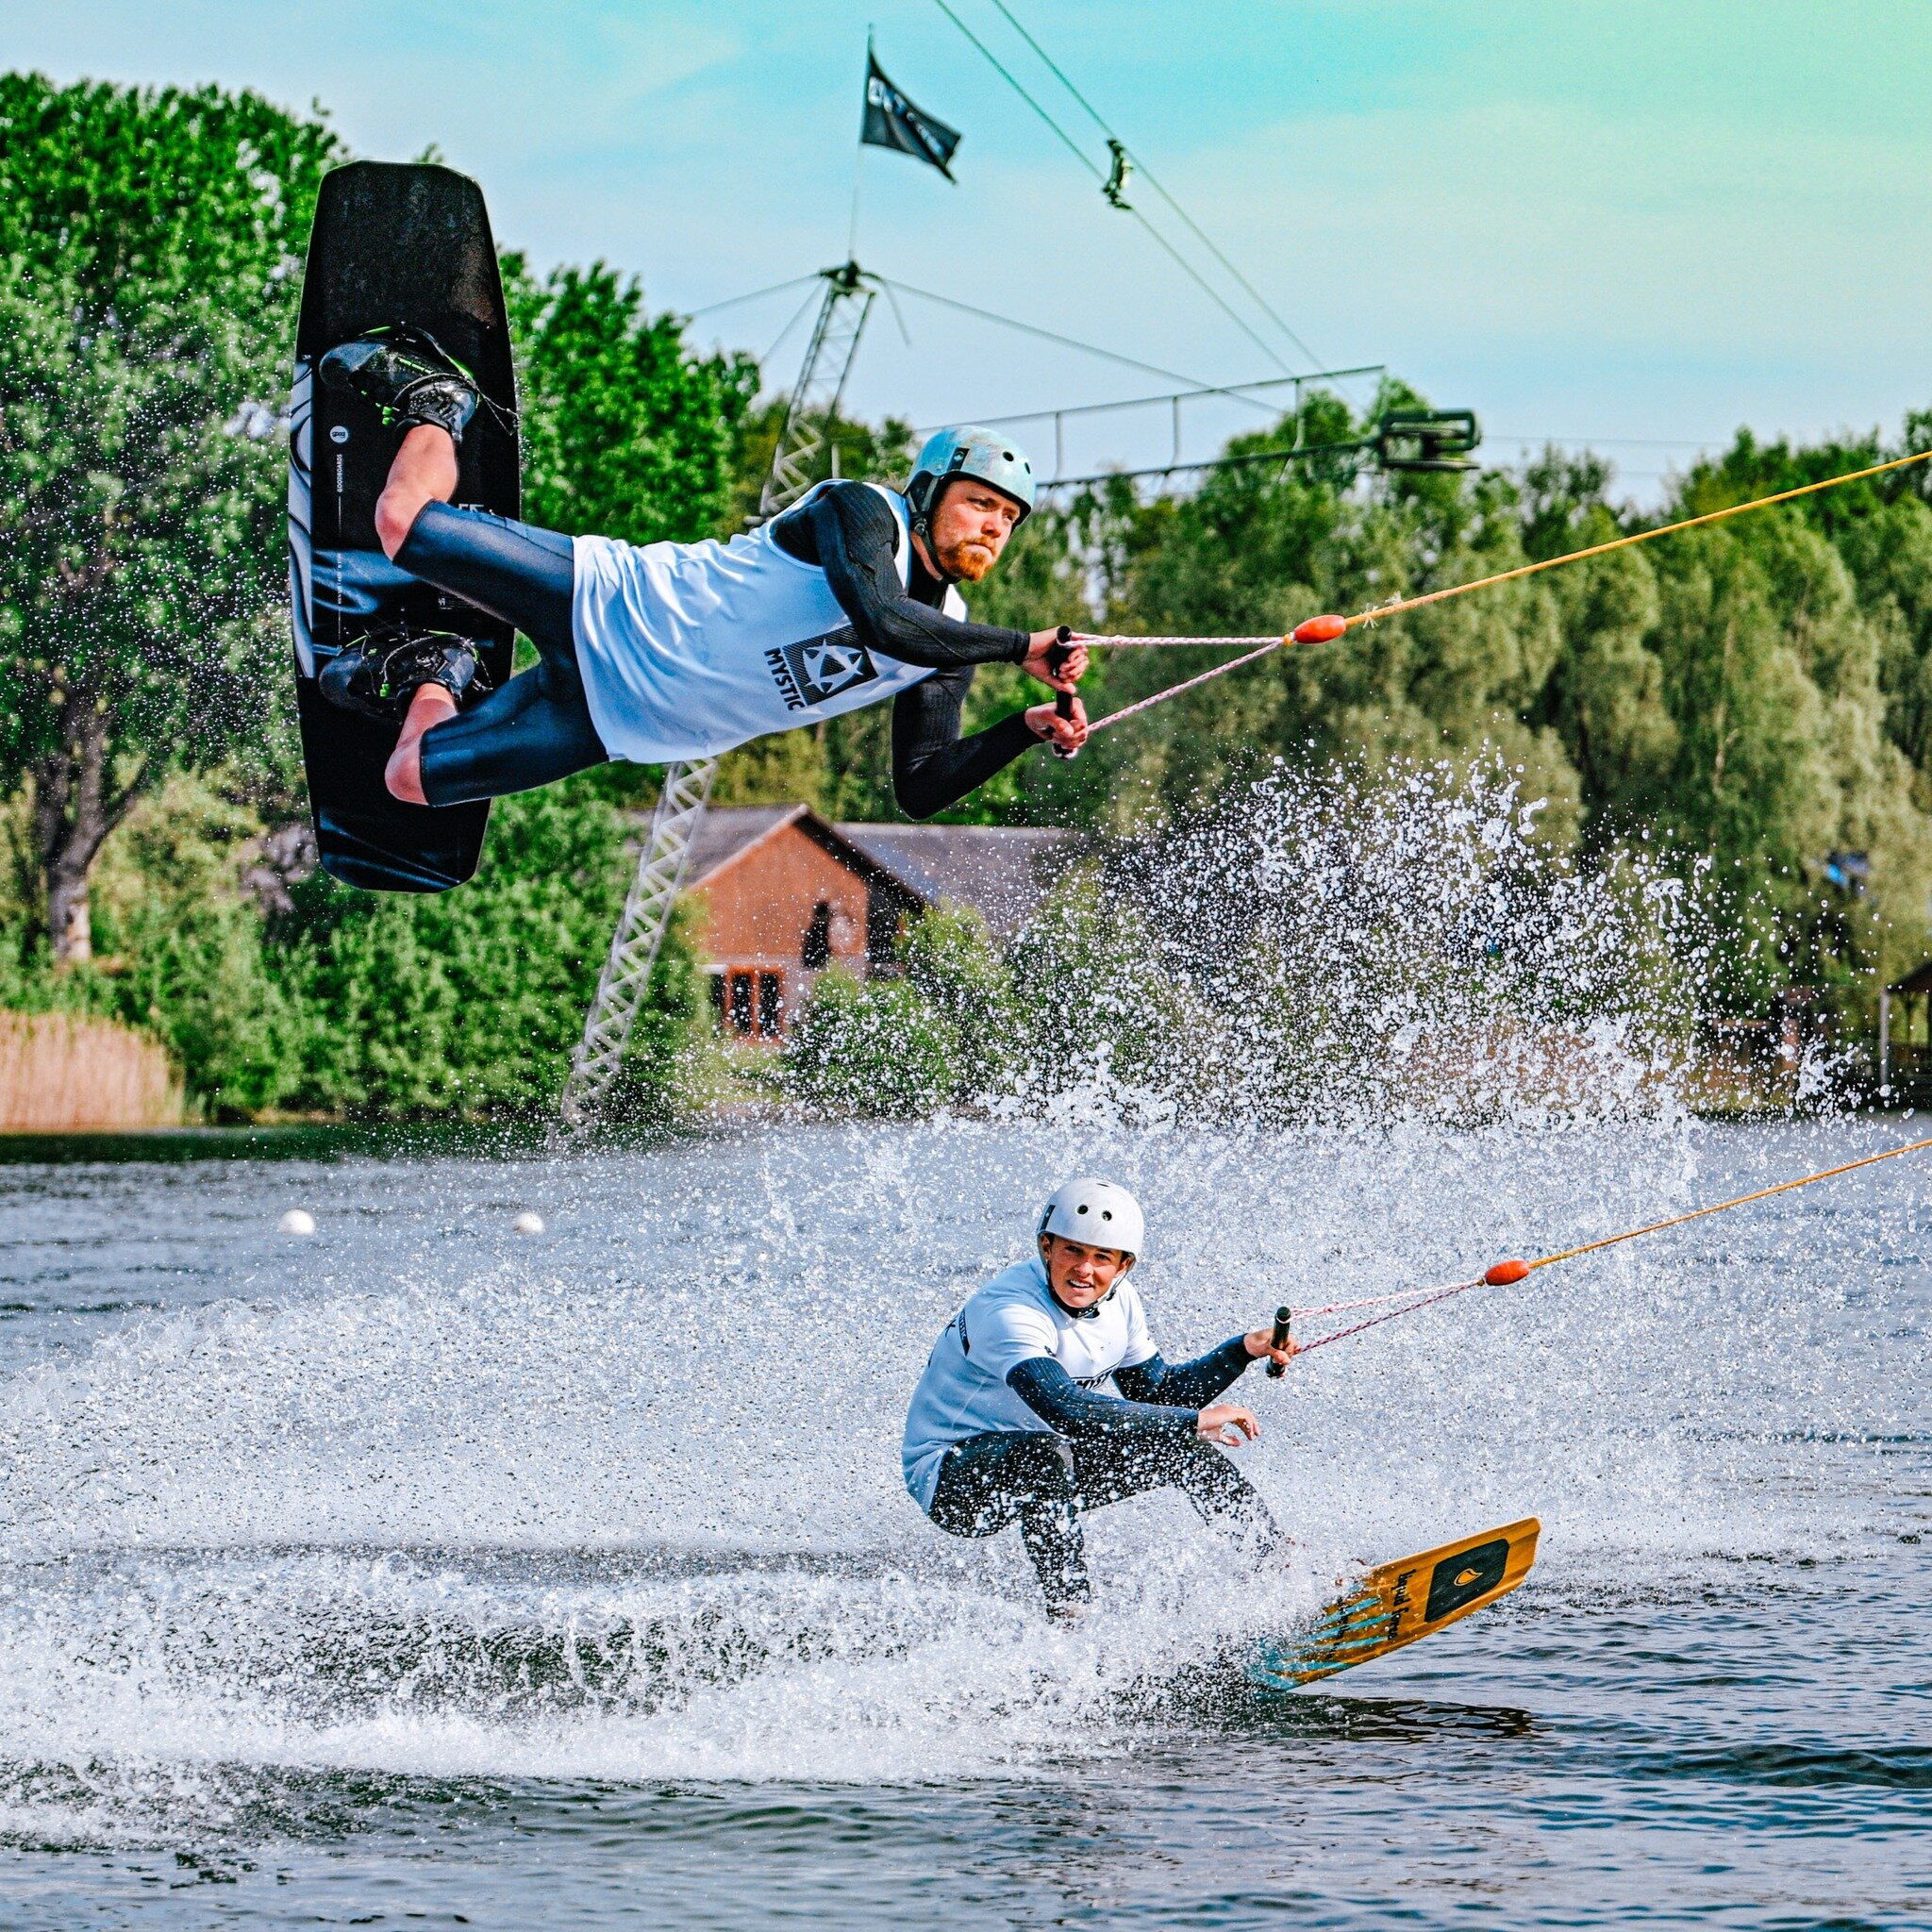 Sunday = Funday! 🥳

Boek je ticket via:
https://www.cableparkaquabest.nl/book-online

See you at the lake! 💦

#welovewakeboarden
#cableparkaquabest #wakeboarding #wakeboard #waterski #lake #aquabest #eindhoven #cablepark #wake #sport #wakeskate #ca